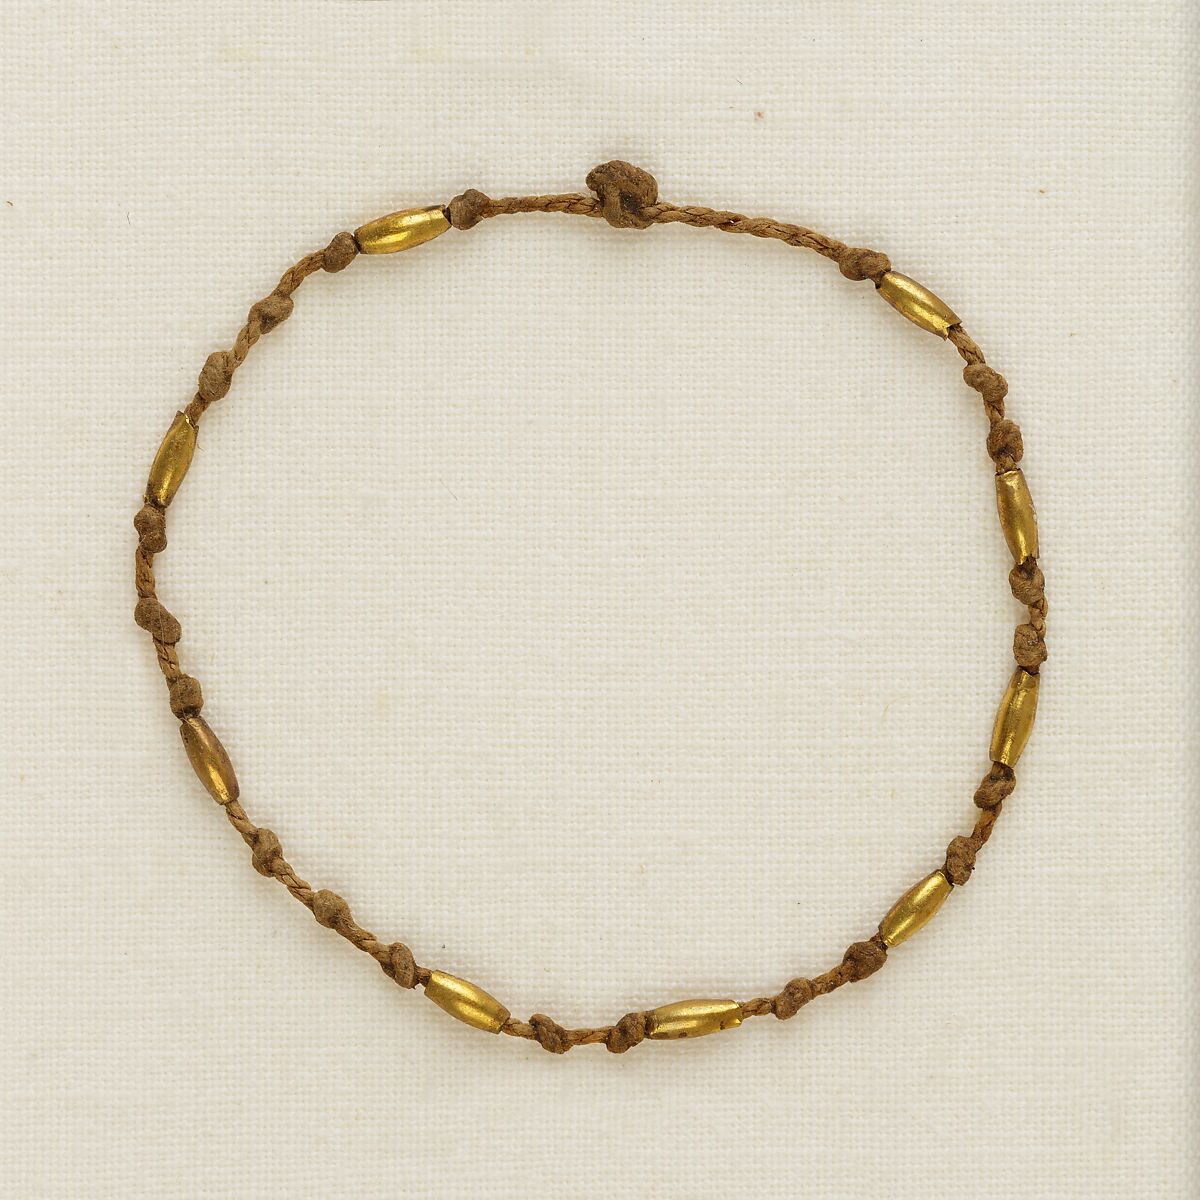 Bracelet with knots and barrel beads, Linen, gold 